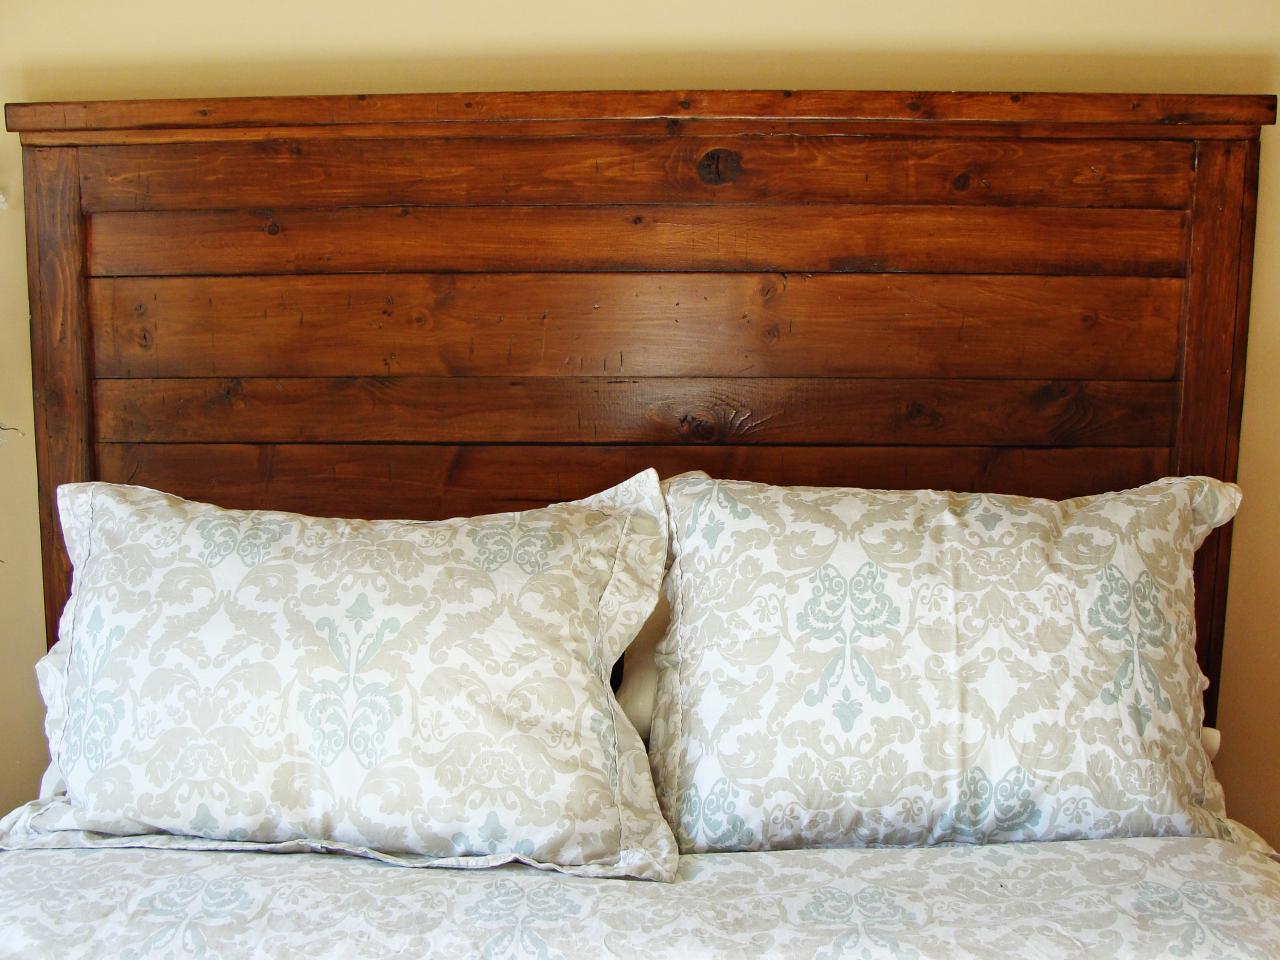 How To Build A Rustic Wood Headboard, Rustic Bed Frame Plans